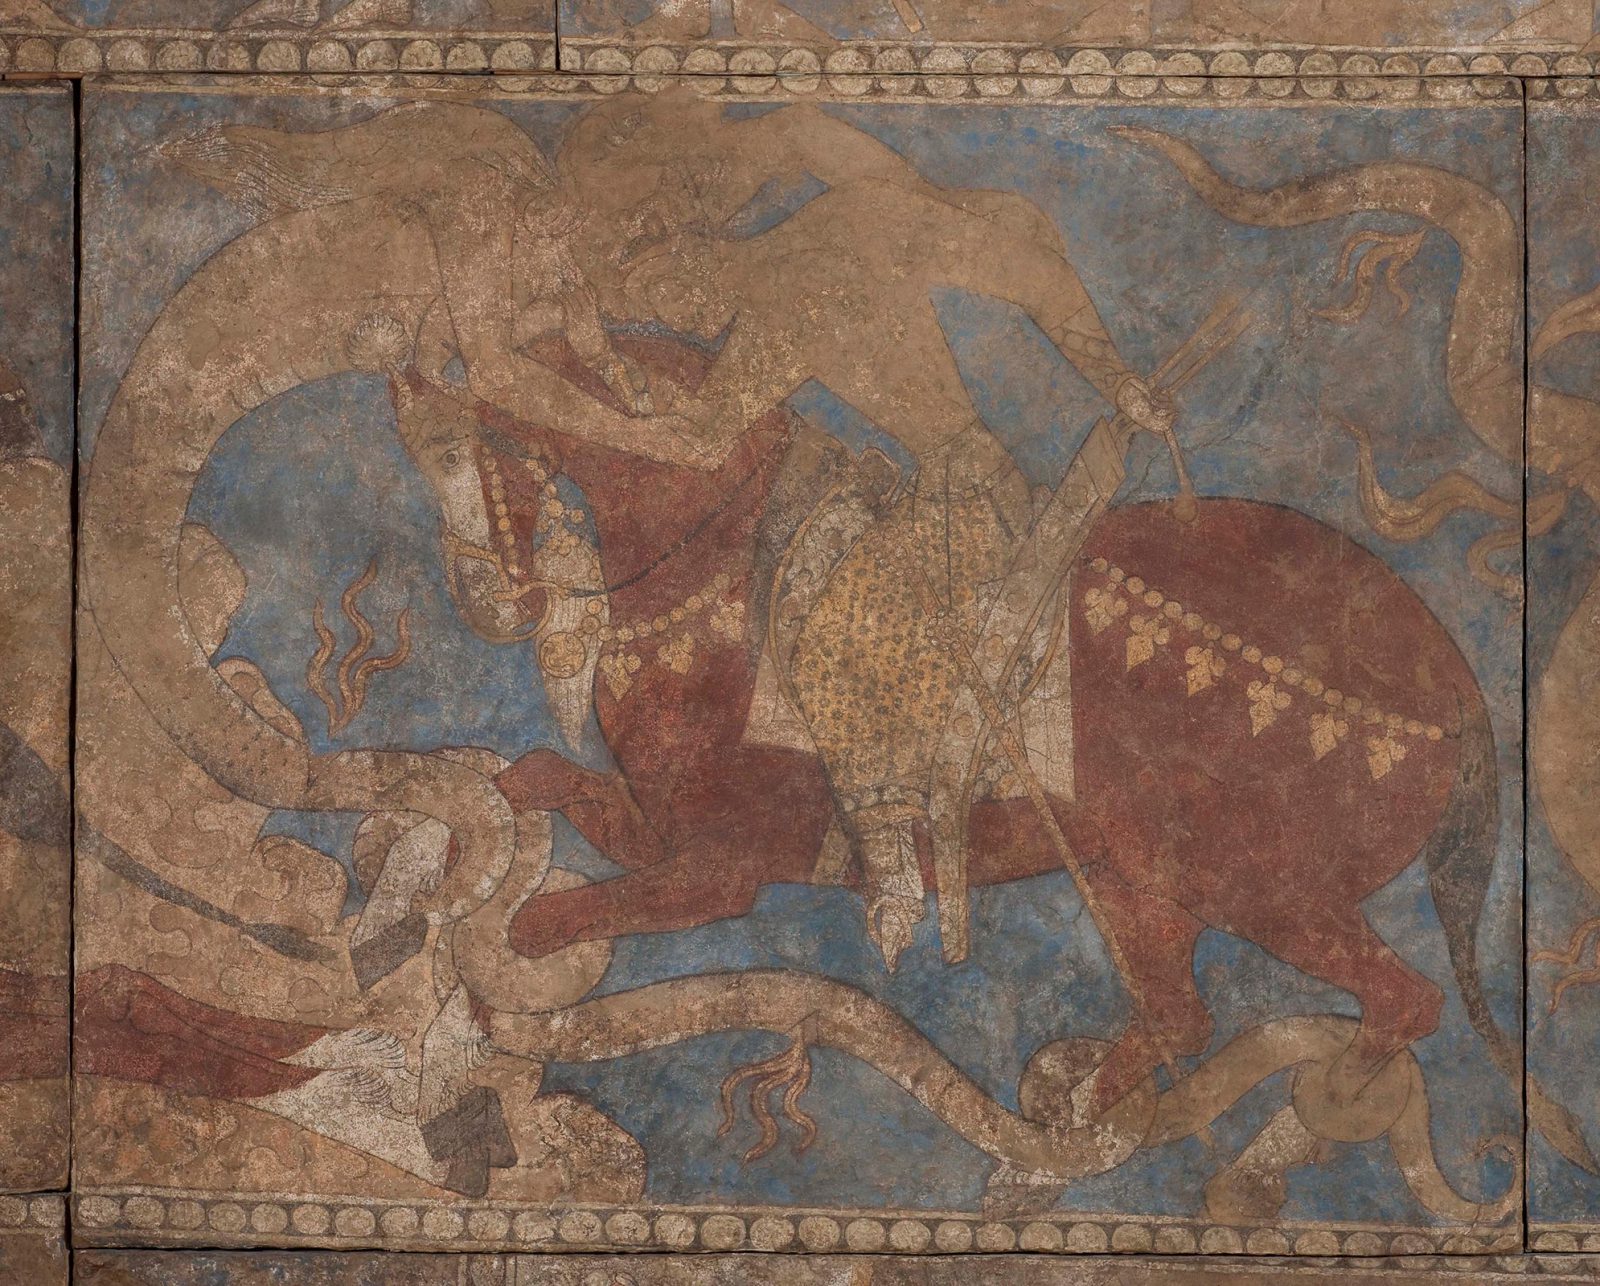 Fig. 5 Detail: Episode 3. Rustam is in great peril as he fights a dragon that has coiled itself around Rakhsh’s legs, pulling Rustam toward its gaping mouth. The painting does not show Rustam’s escape from this dire situation, but part of the Sogdian text offers a version of how he did: “Rustam turned back, attacked the demons like a fierce lion upon its prey or a hyena upon the flock, like a falcon upon a hare or a porcupine upon a snake, and began to destroy them.”
